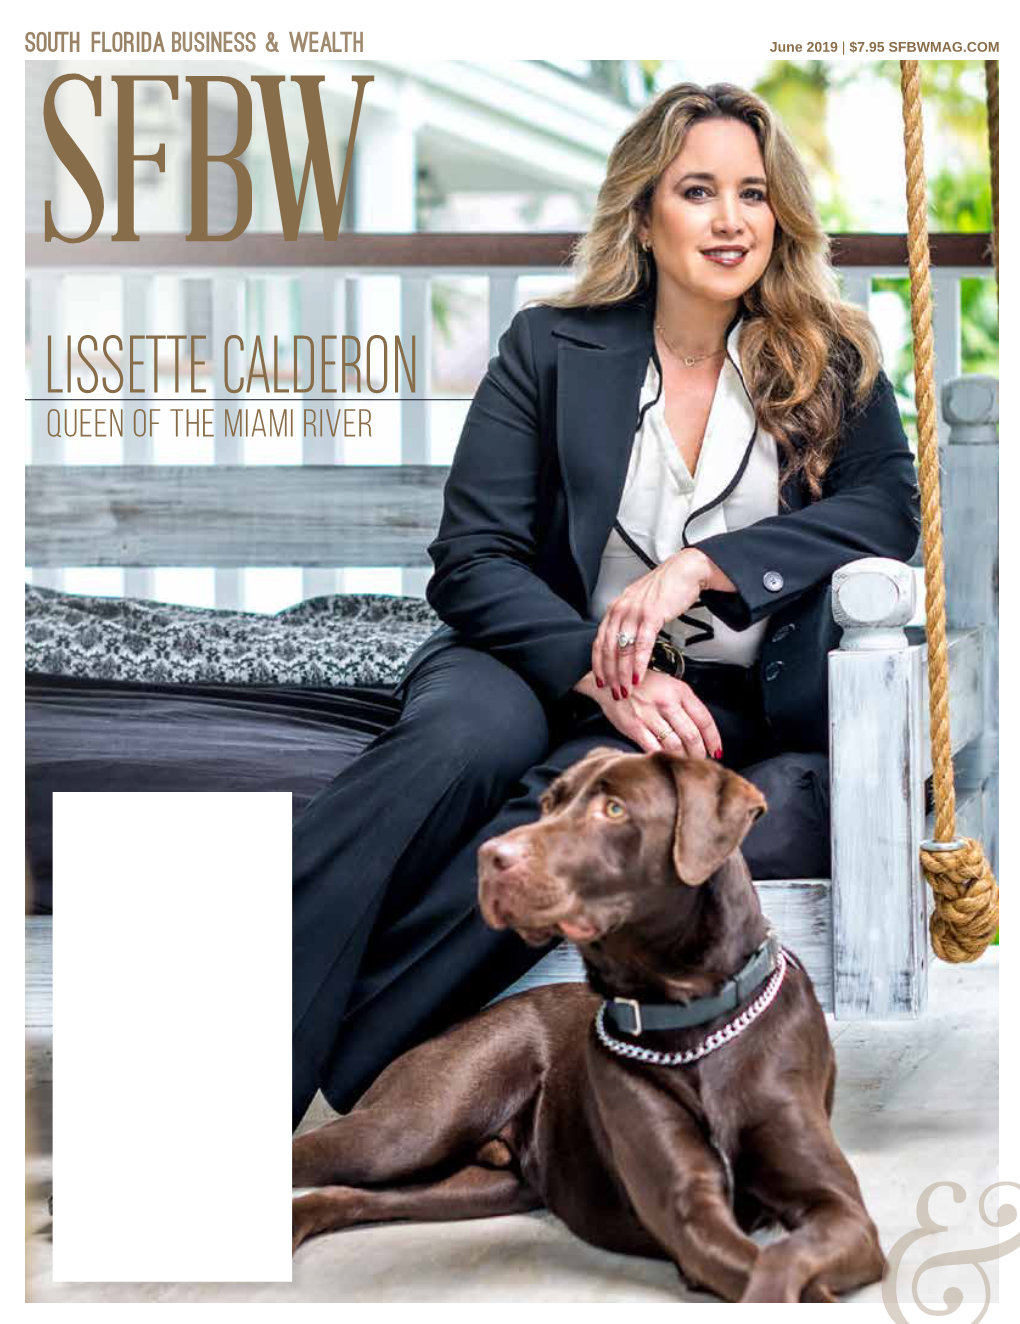 LISSETTE CALDERON Queen of the Miami River Bridging Employers with Benefit Solutions